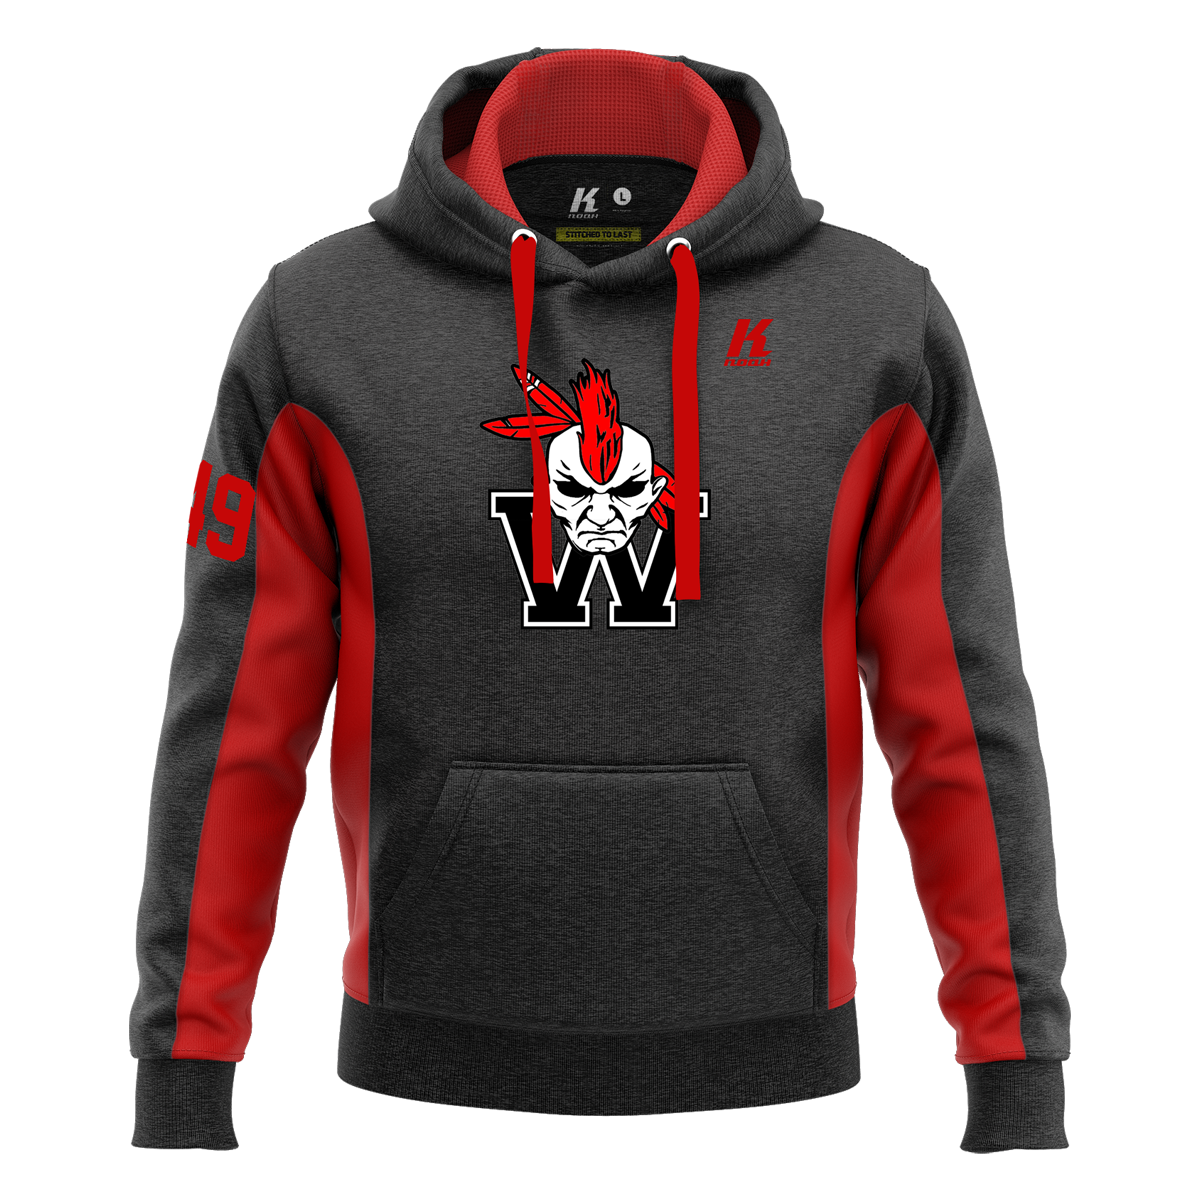 Warriors Signature Series Hoodie with Playernumber/Initials